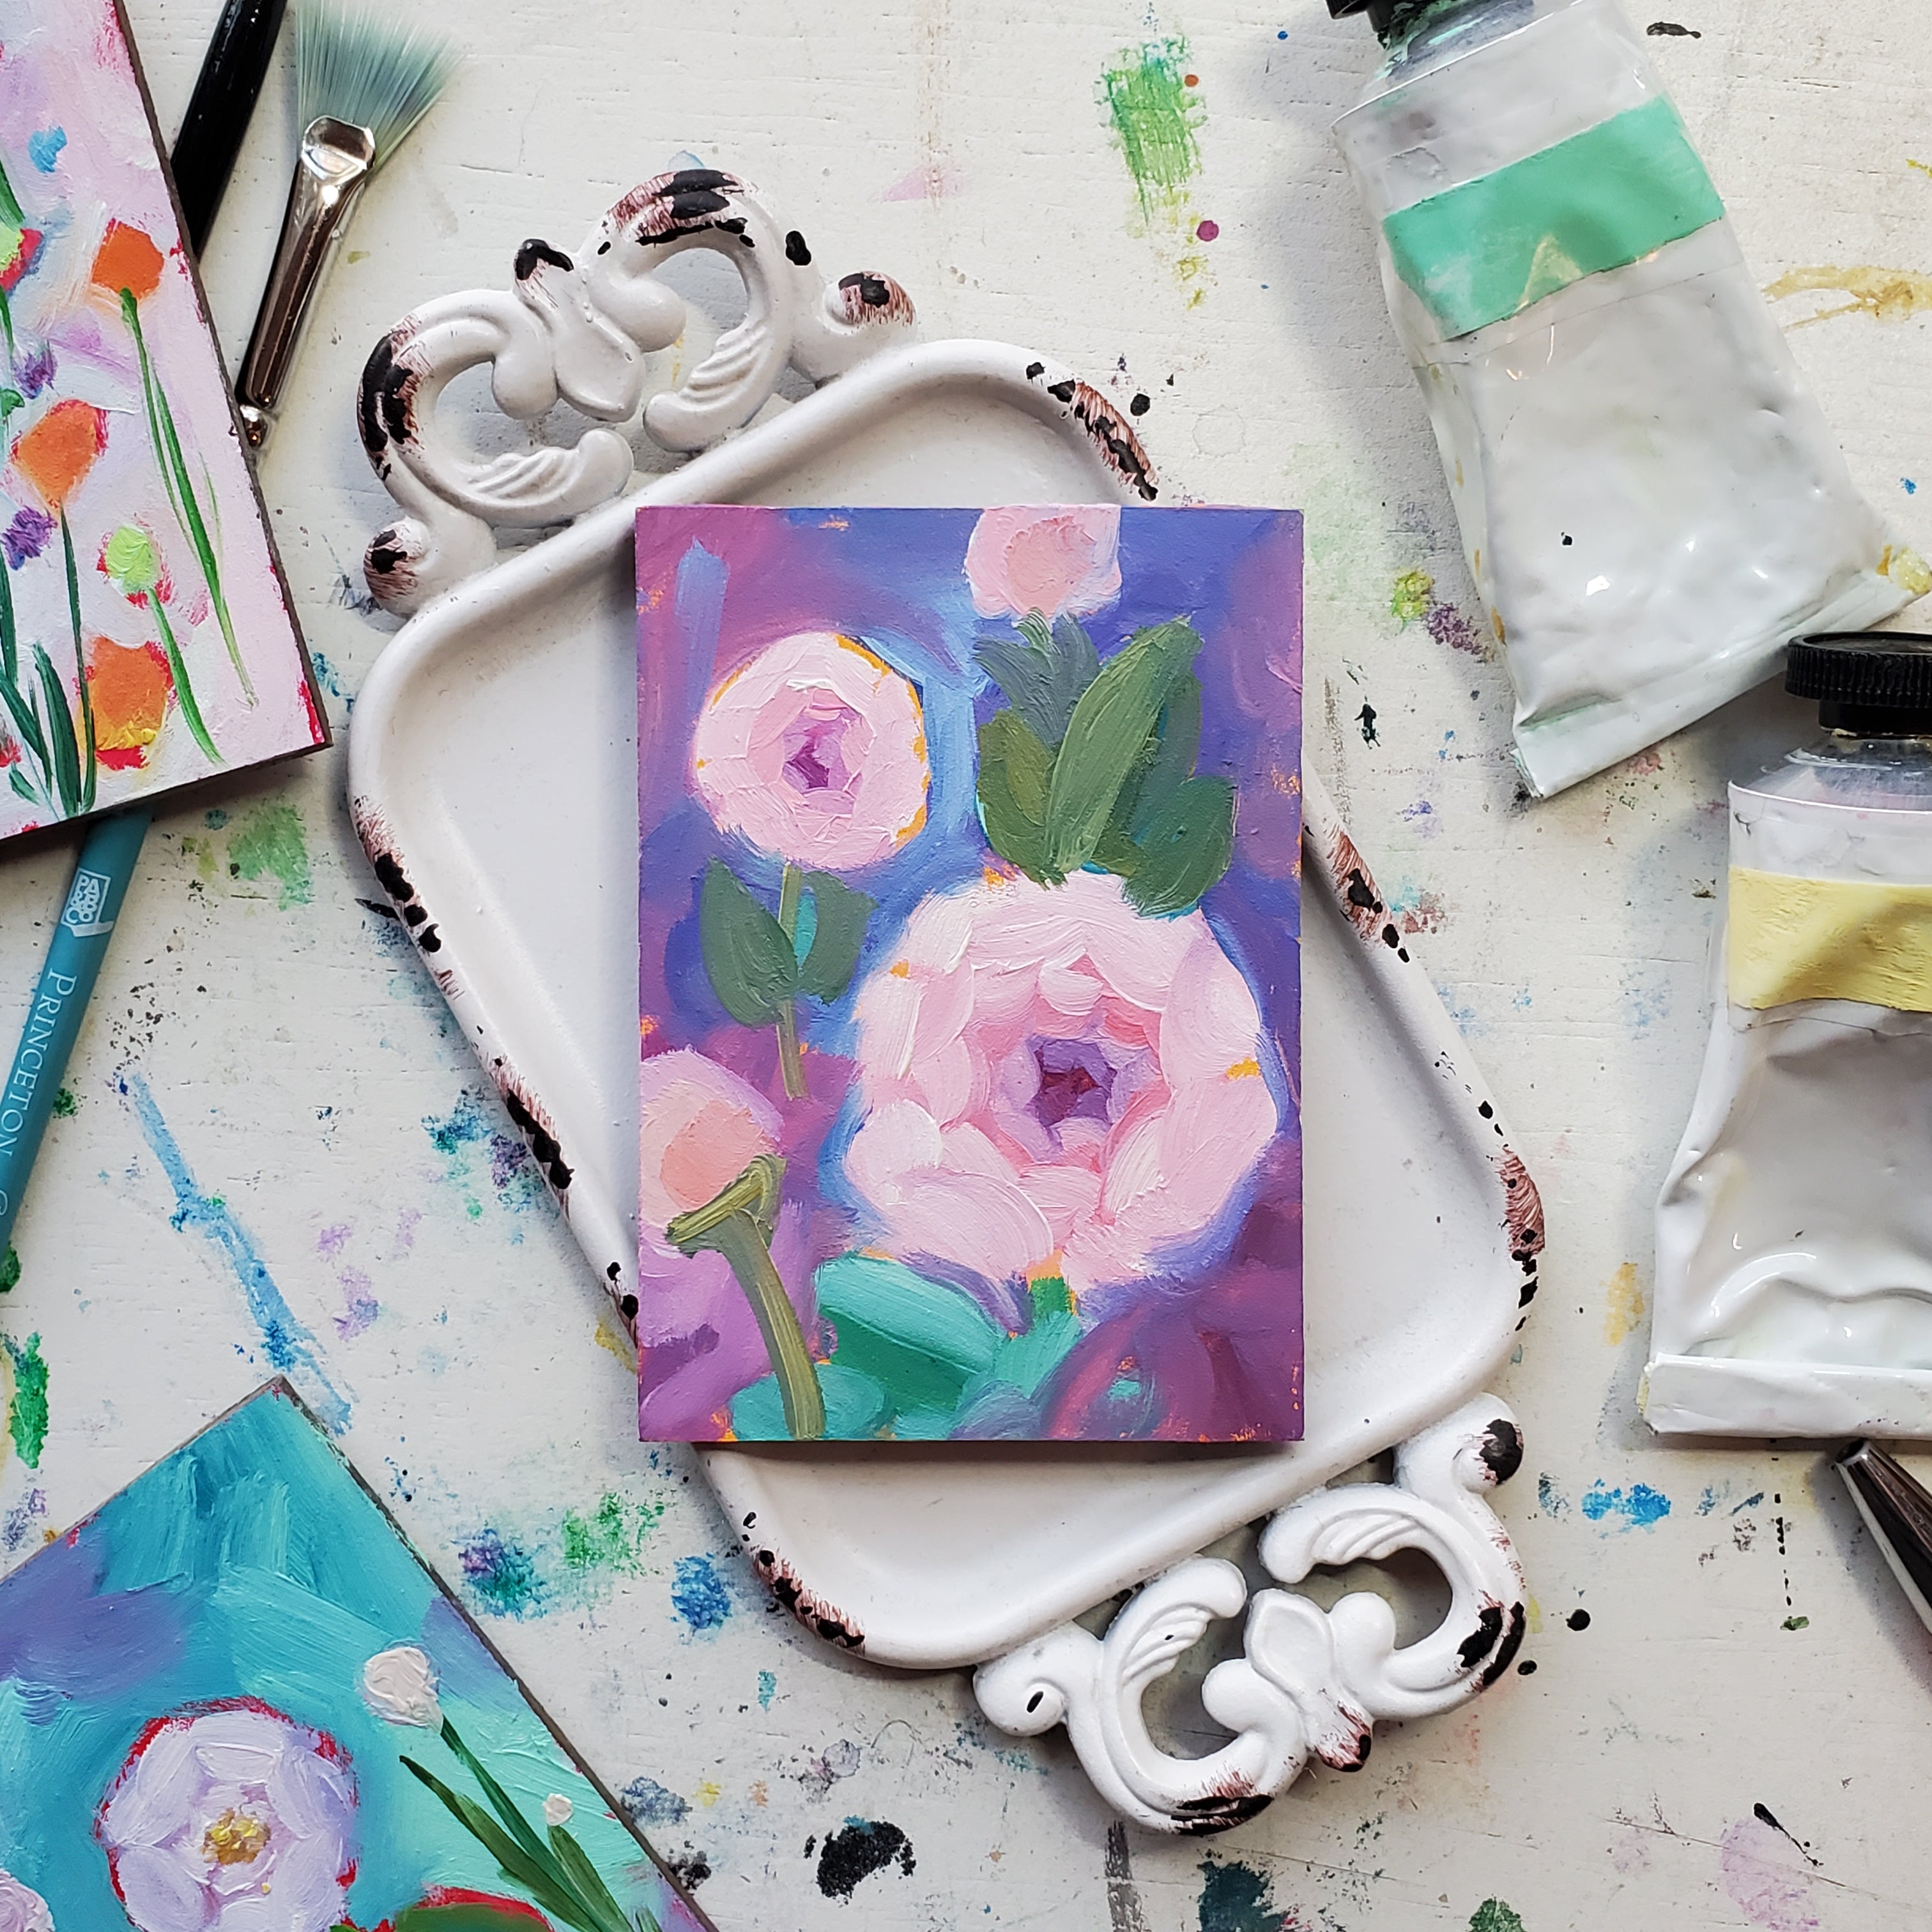 Blush Floral || Mini Oil Painting on Panel || Display Easel Included